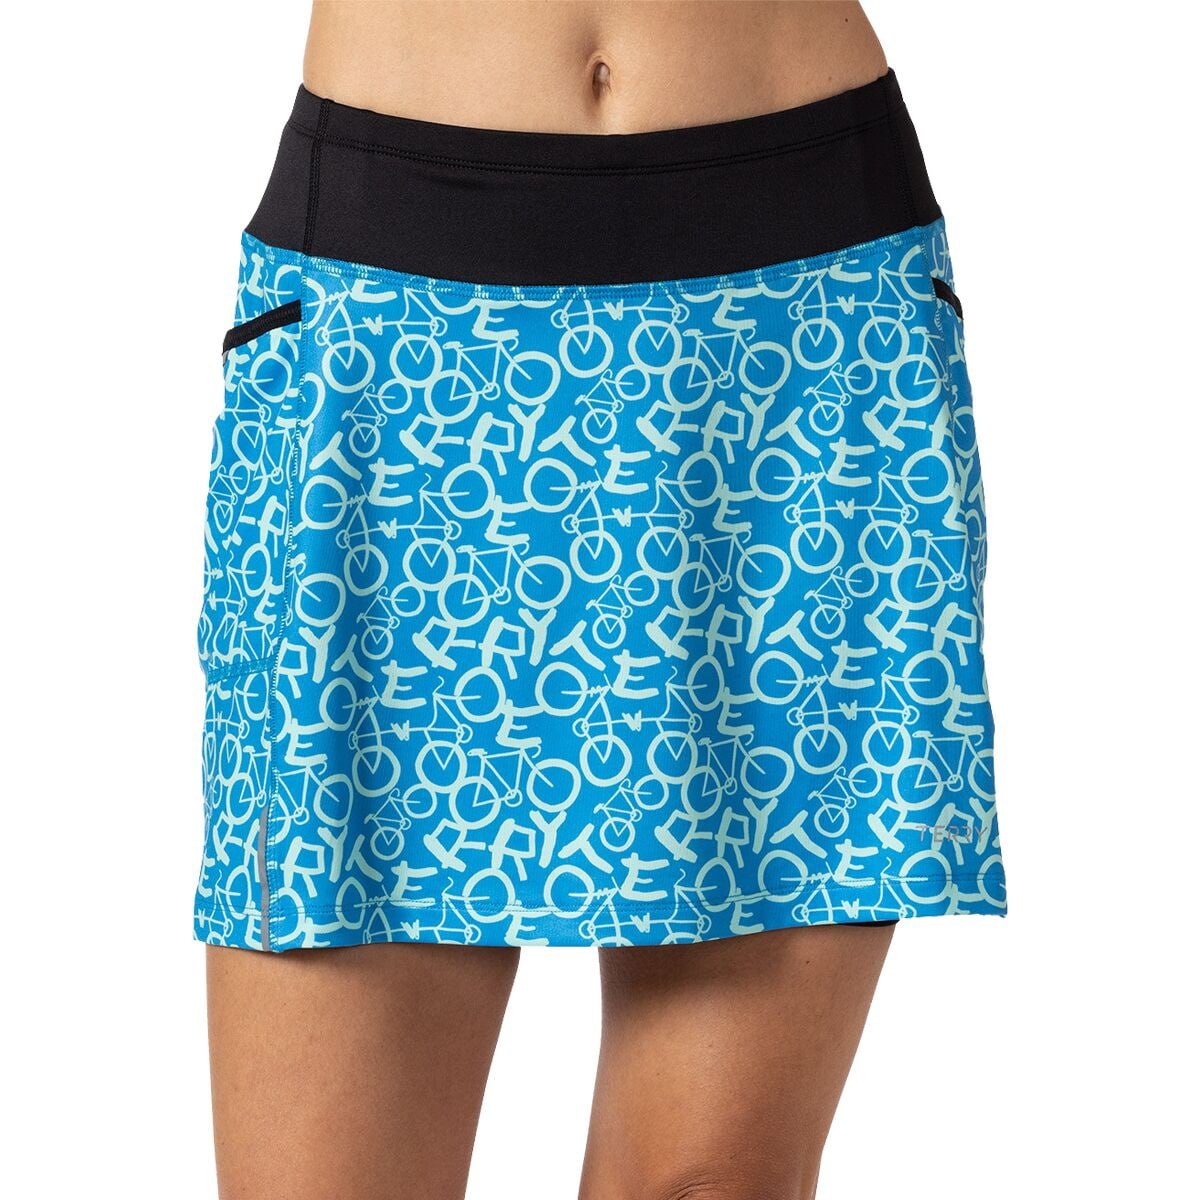 Terry Bicycles Trixie Skort - Women's